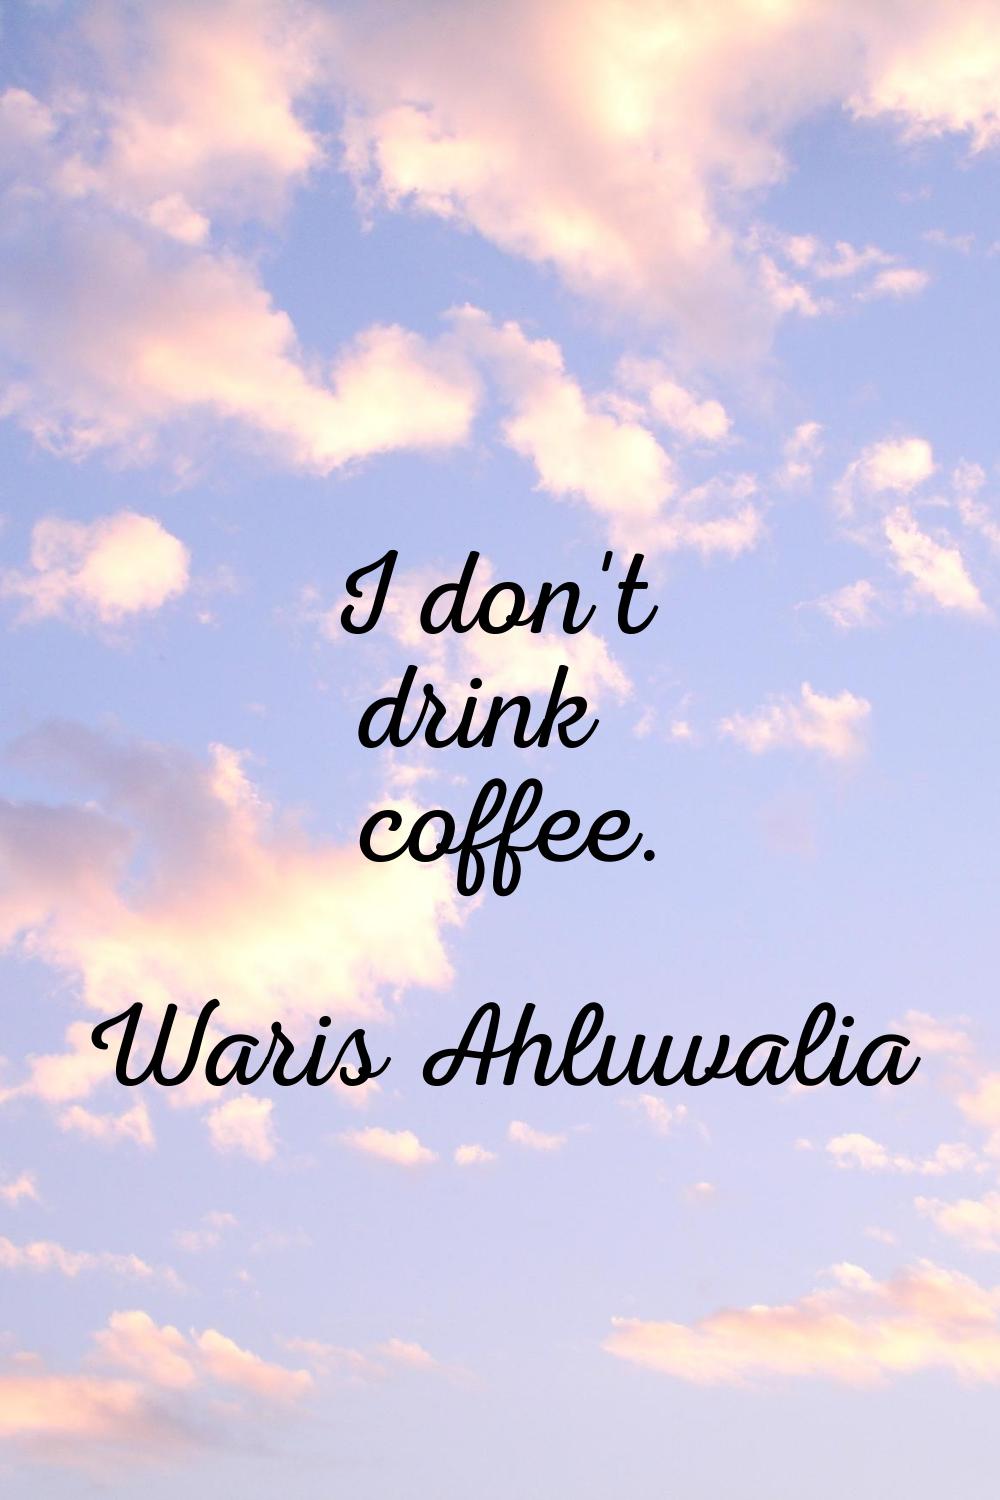 I don't drink coffee.